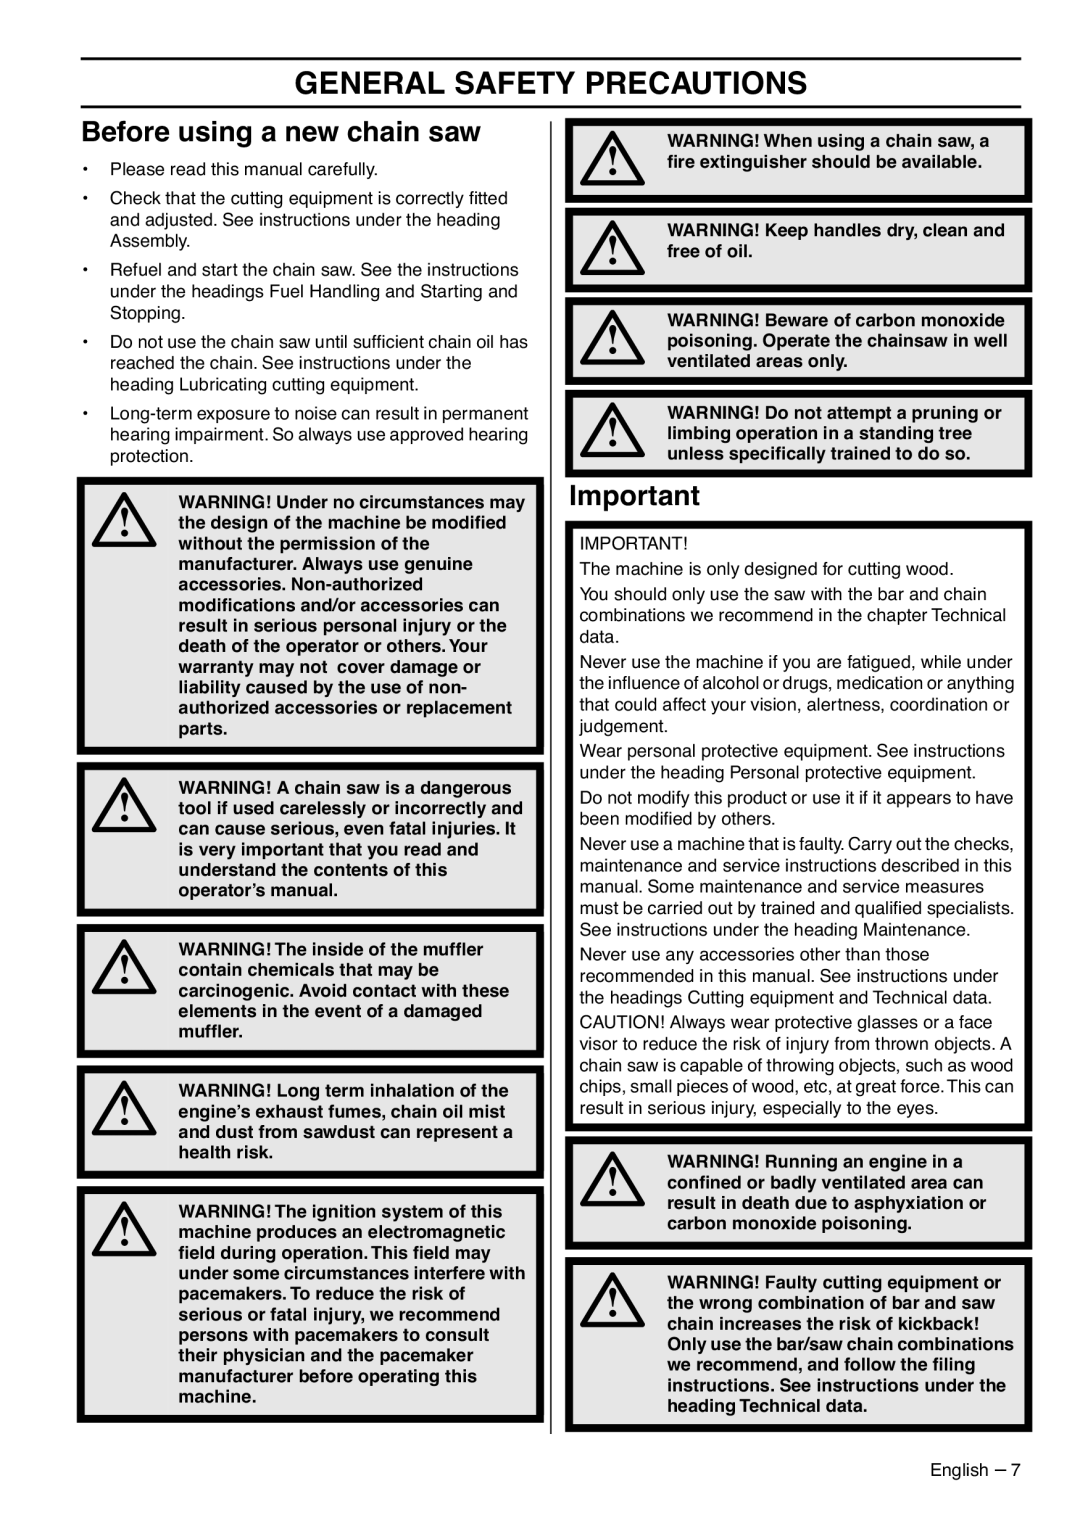 RedMax G5300 manual General Safety Precautions, Before using a new chain saw 